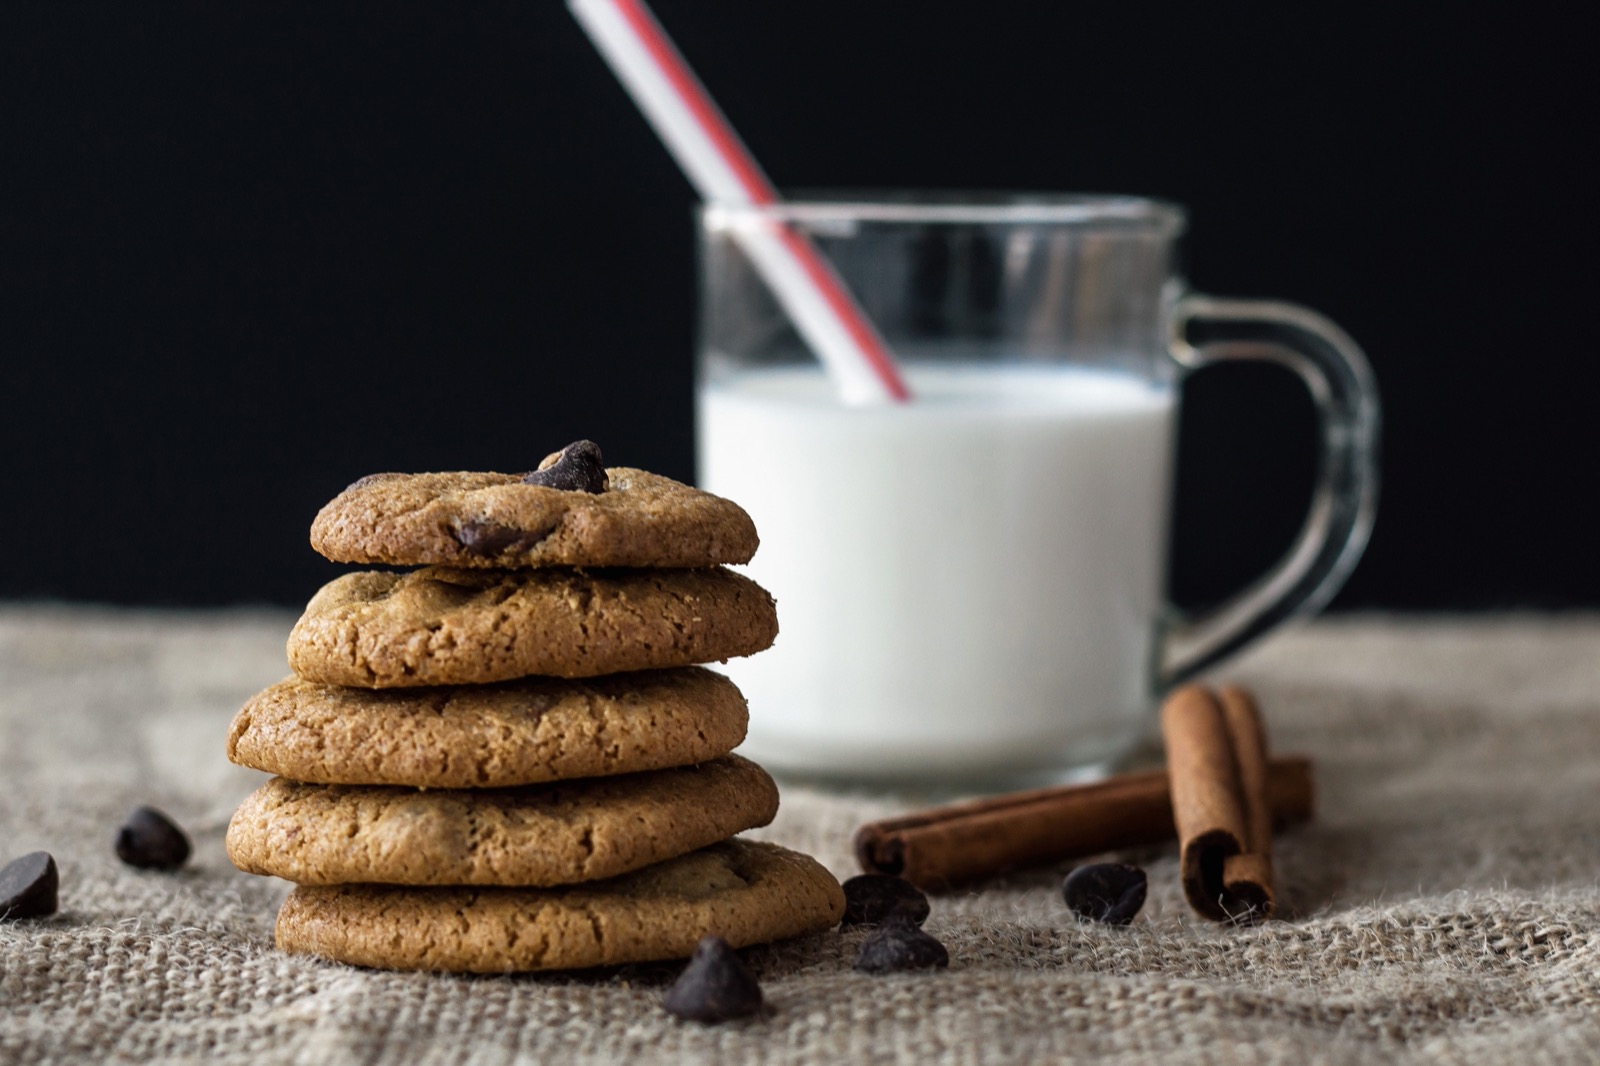 Are You a Master of General Knowledge? Take This True or False Quiz to Find Out Milk and cookies